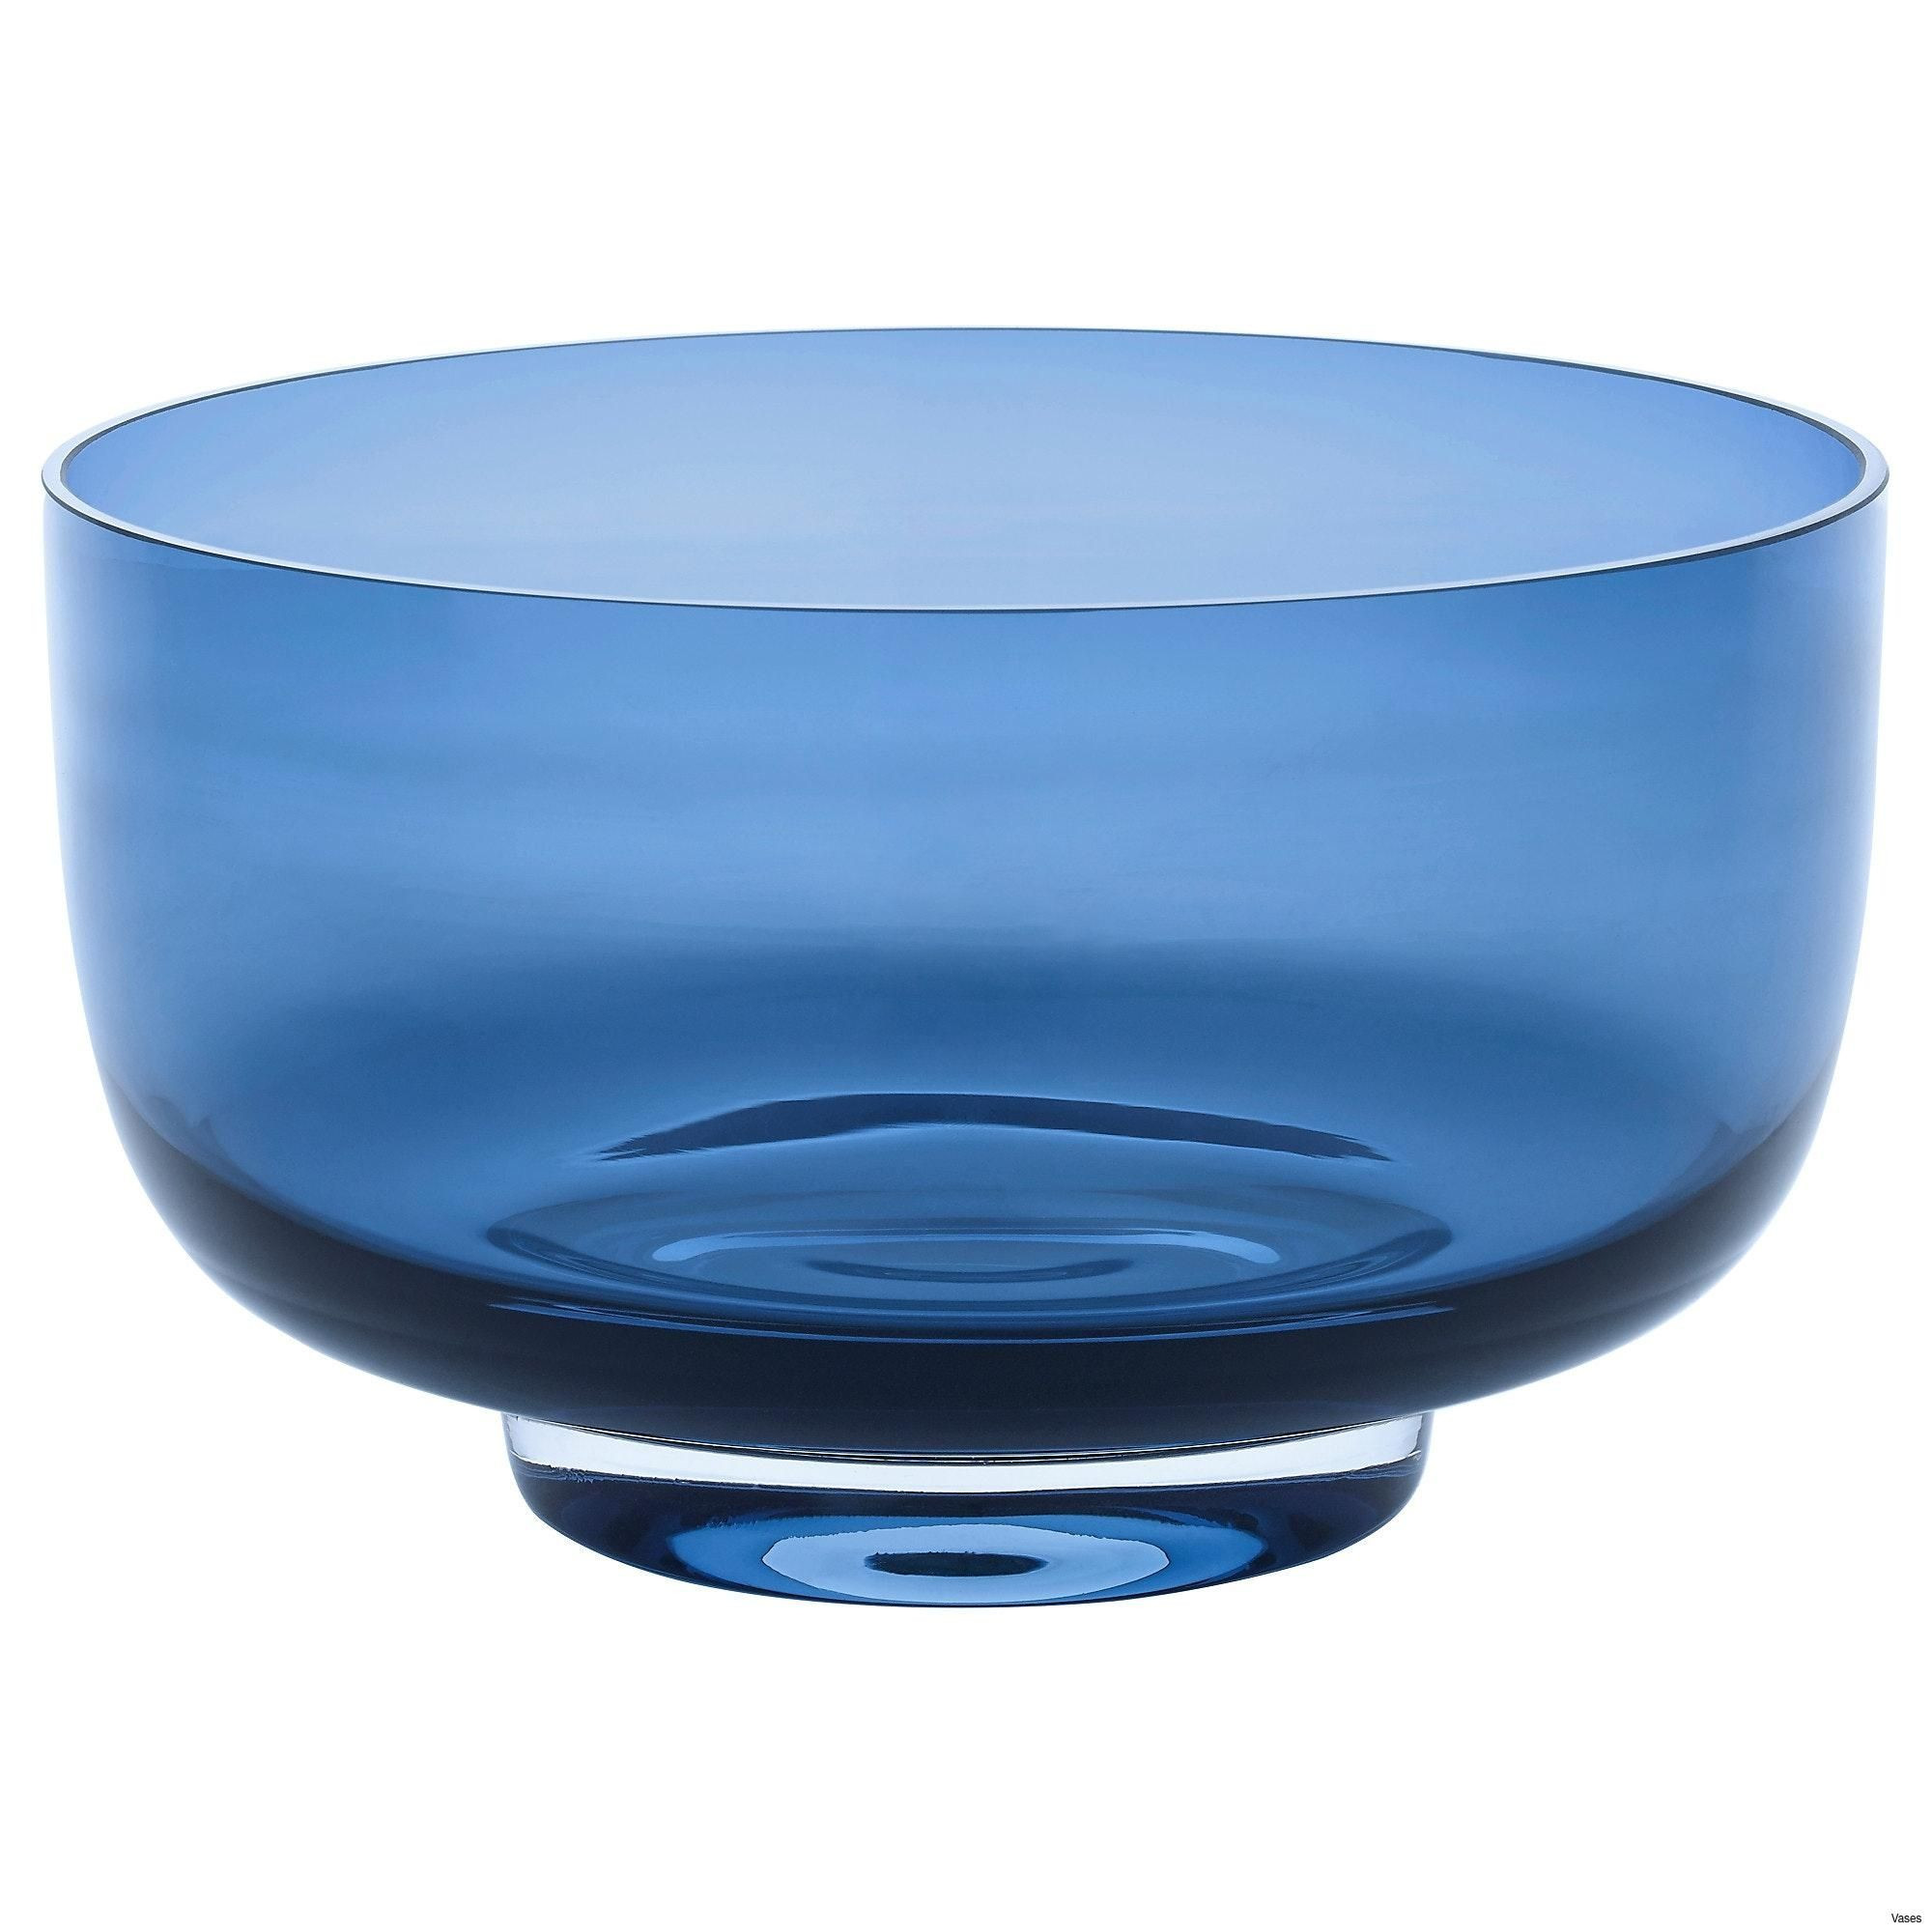 29 Wonderful Cobalt Blue Cut Glass Vase 2024 free download cobalt blue cut glass vase of 23 blue crystal vase the weekly world regarding decorative glass bowl new living room ikea vases awesome pe s5h